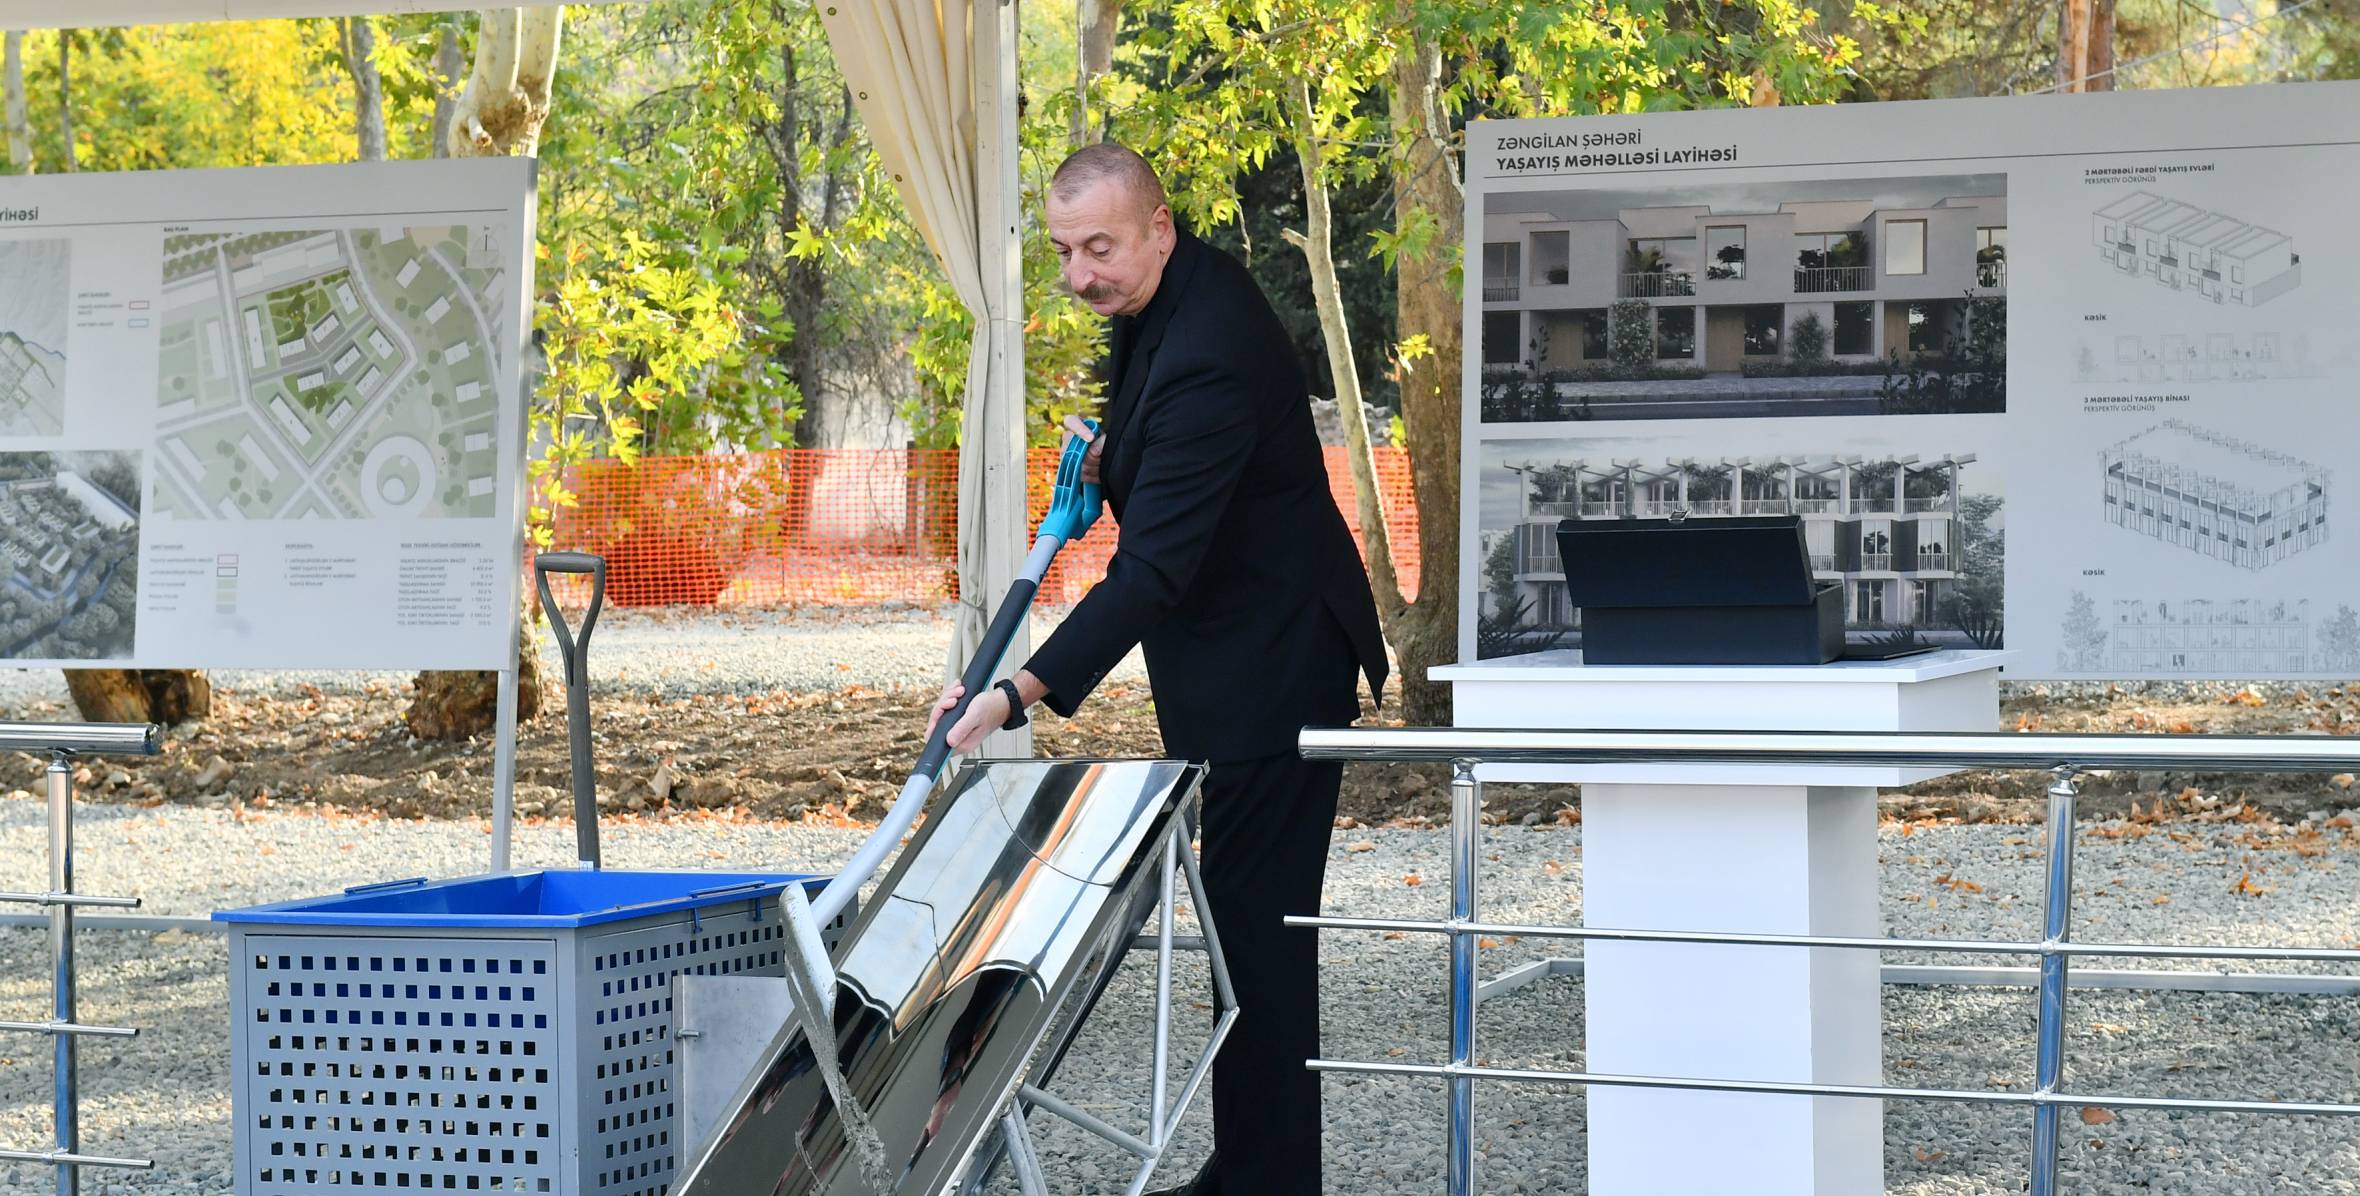 Ilham Aliyev laid foundation stone for first residential building in Zangilan